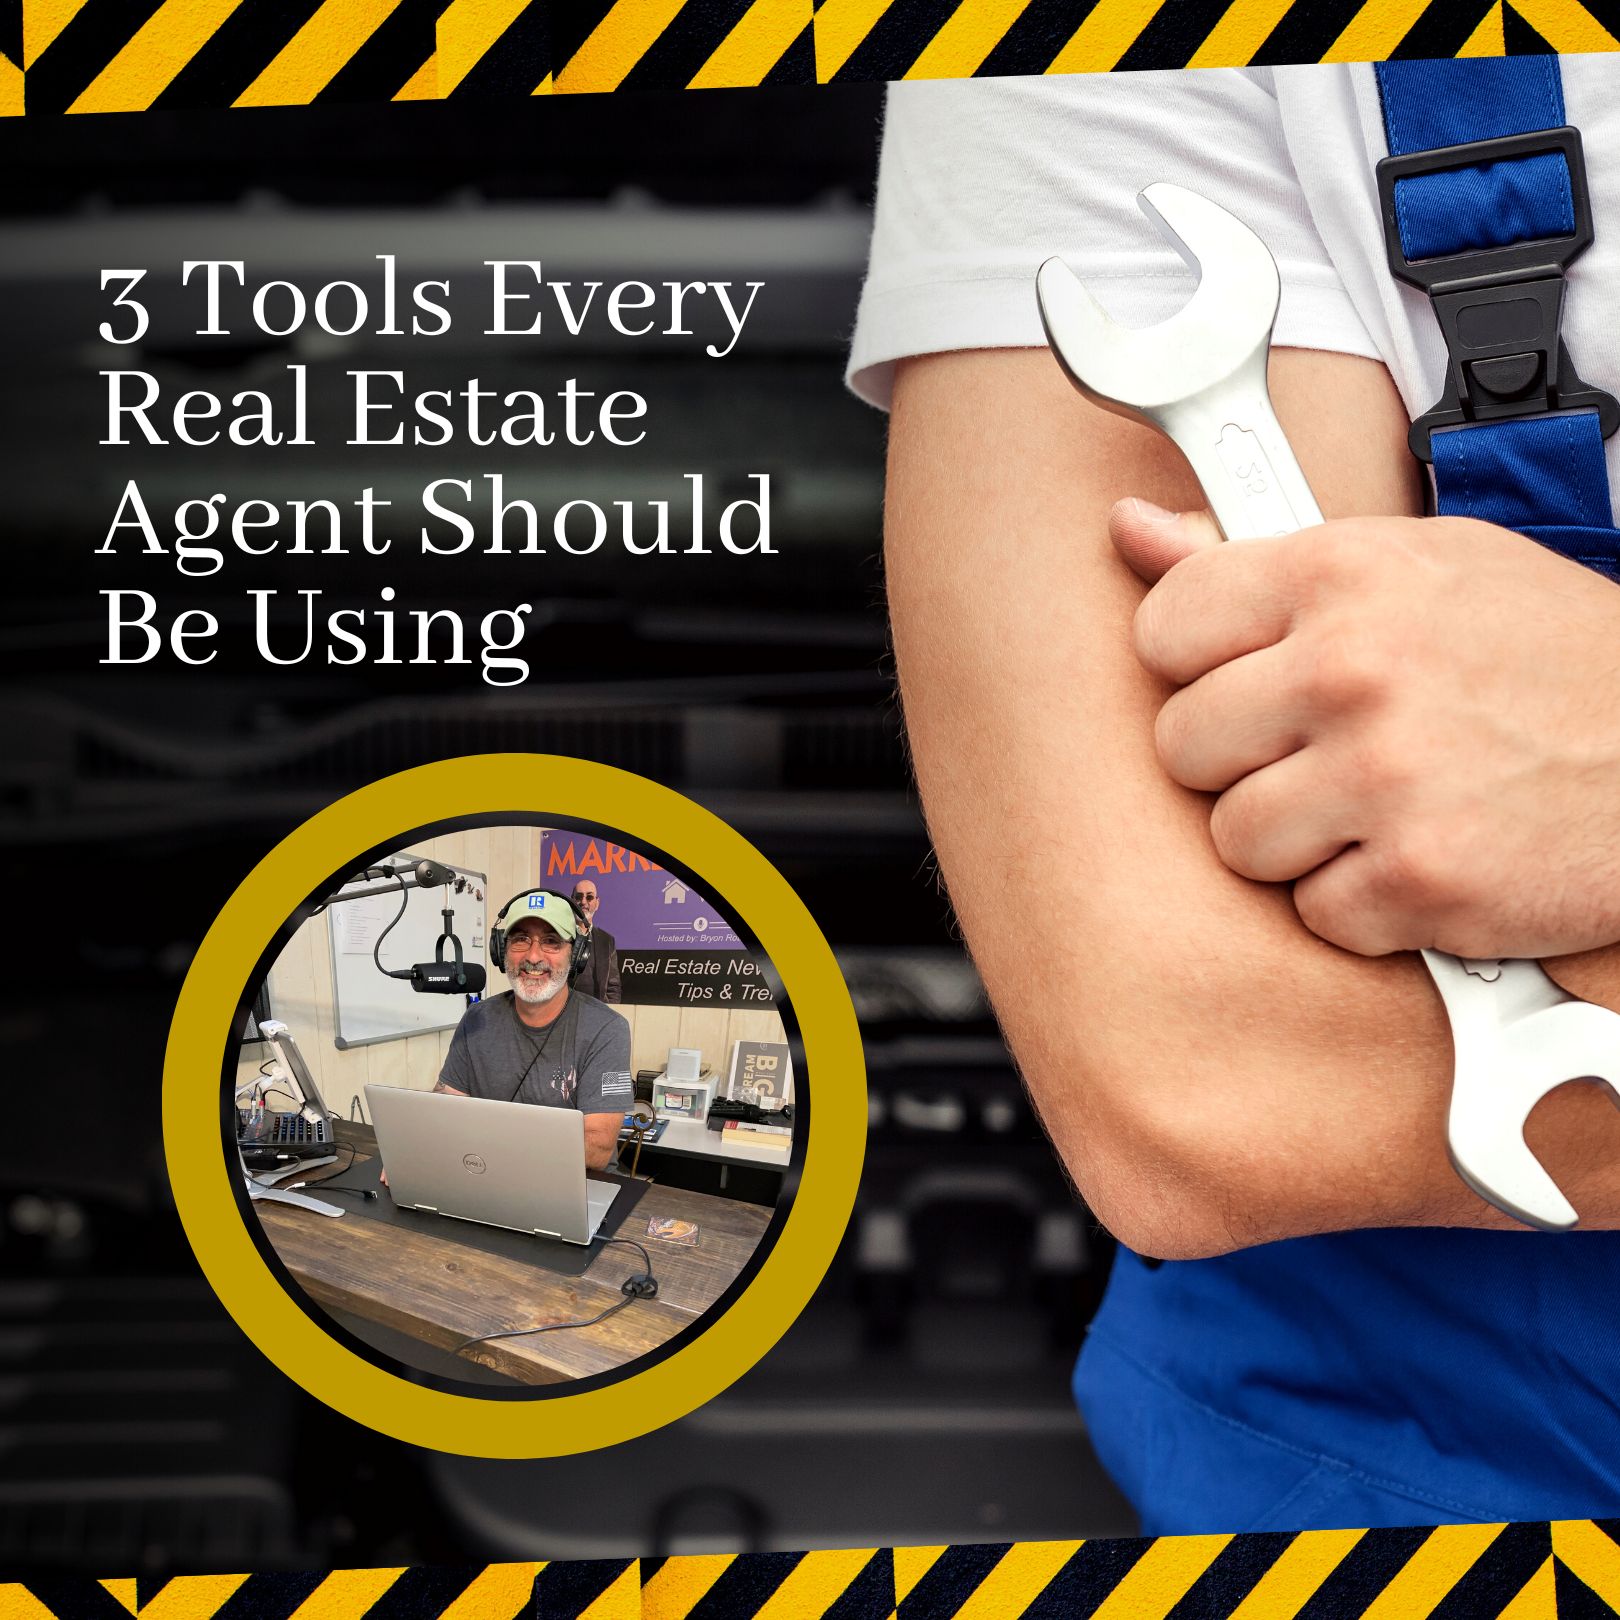 3 Tools Every Real Estate Agent Should Be Using